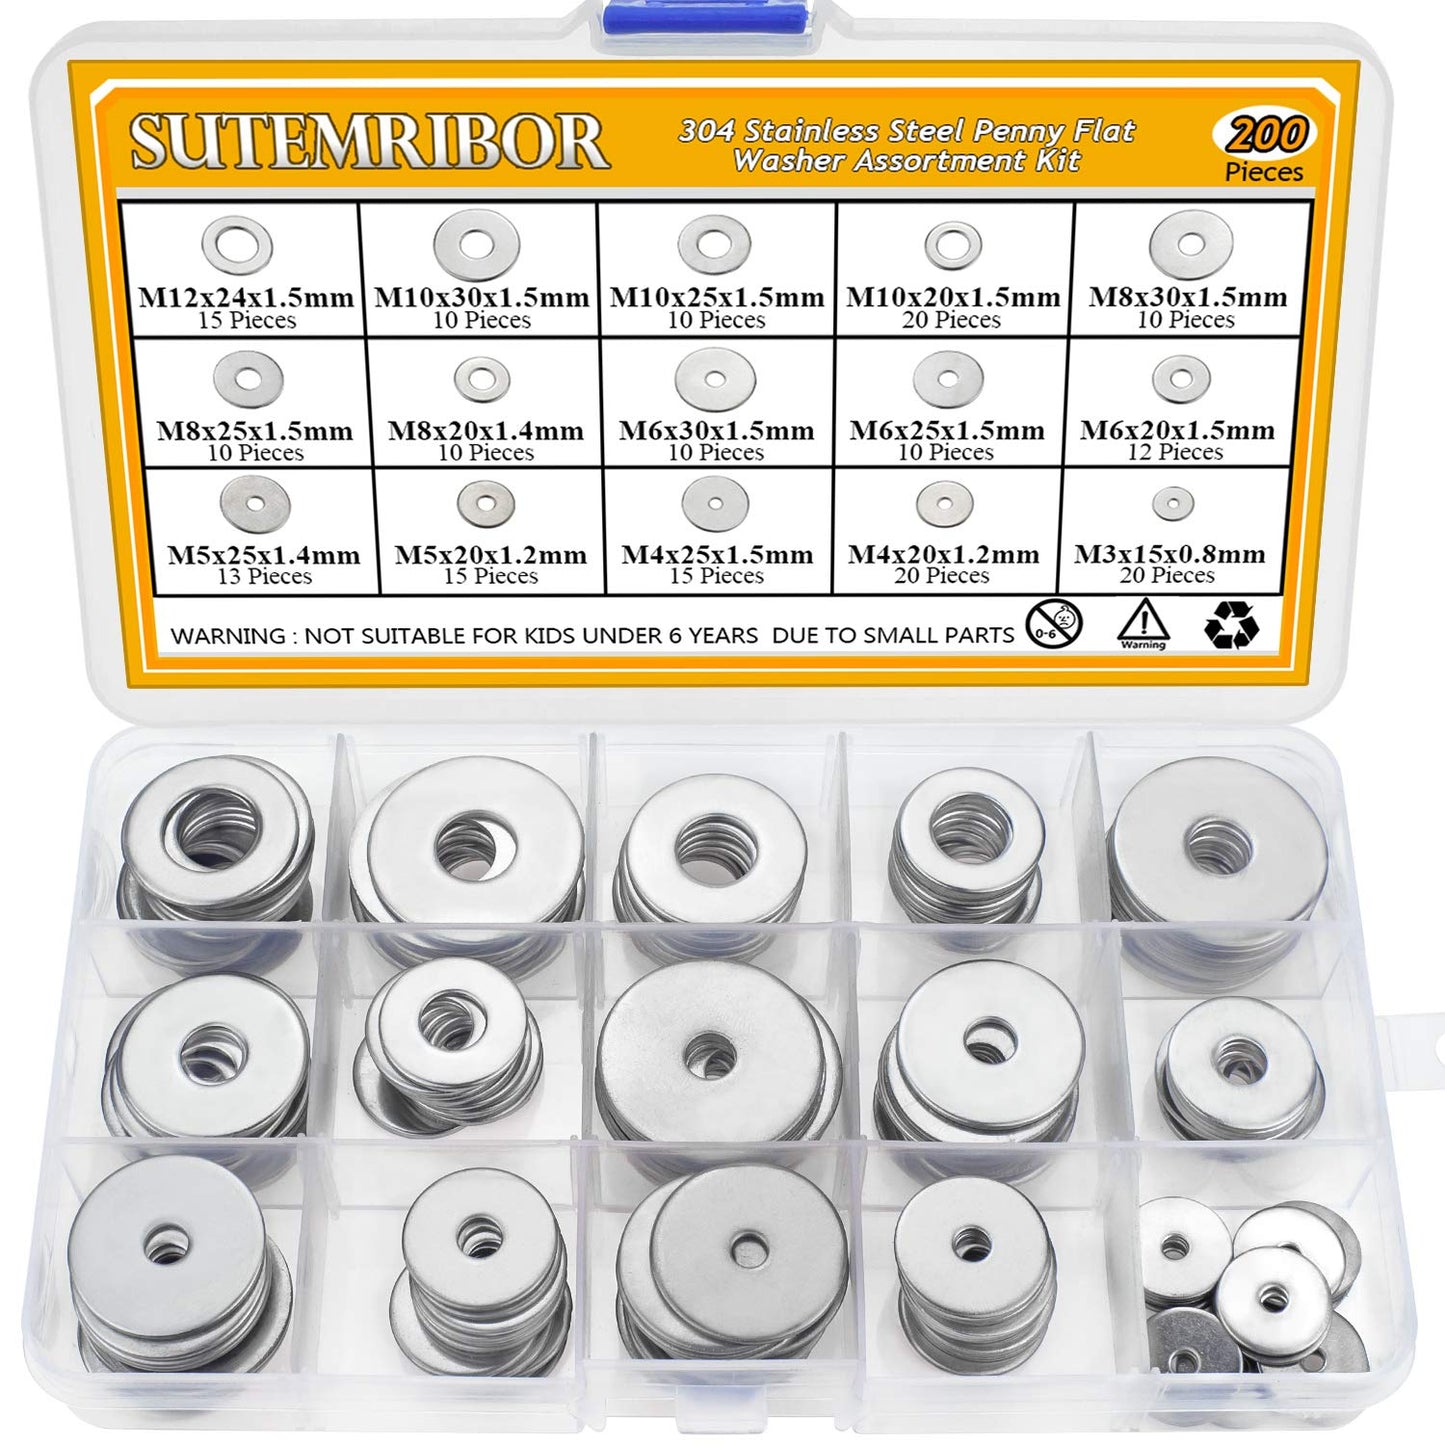 Sutemribor 304 Stainless Steel Large Fender Washer Assortment Kit 200 Pieces, 15 Sizes - M3 M4 M5 M6 M8 M10 M12 - (For 8 piece(s))